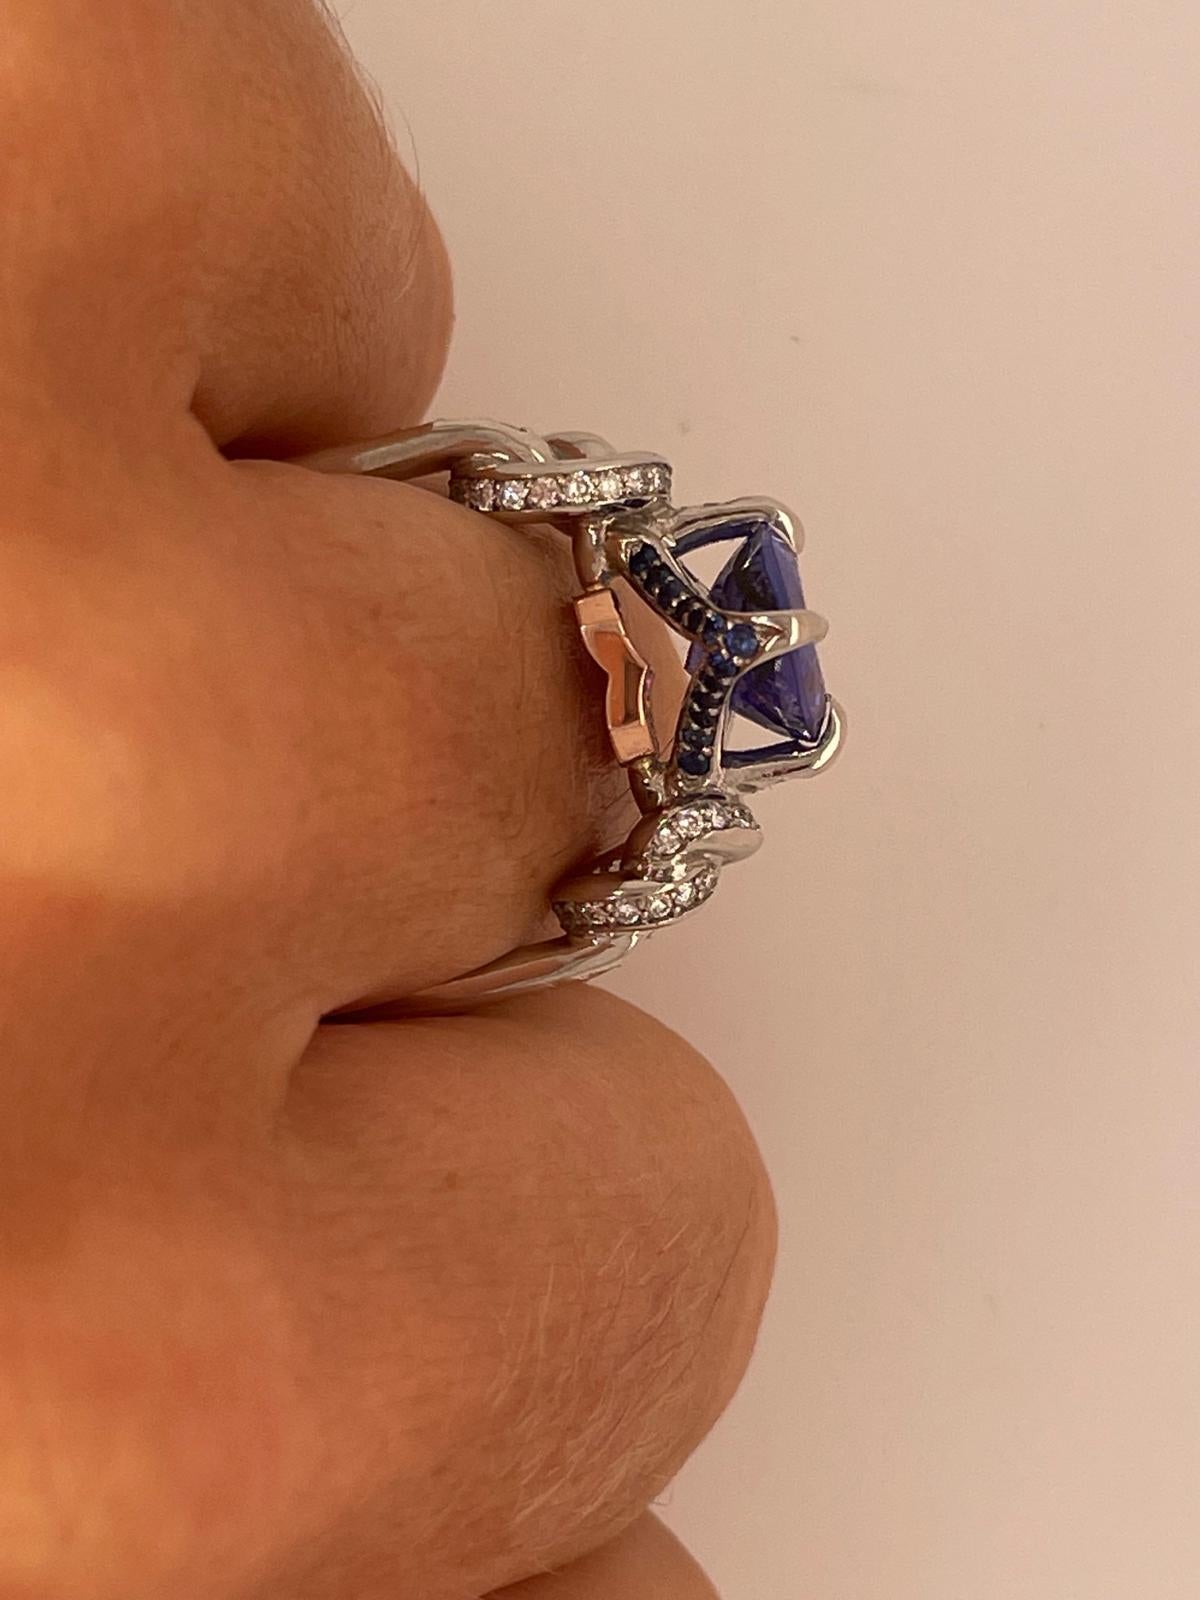 For Sale:  2ct tanzanite and diamond ring in platinum and rose gold  Forget me knot ring  19